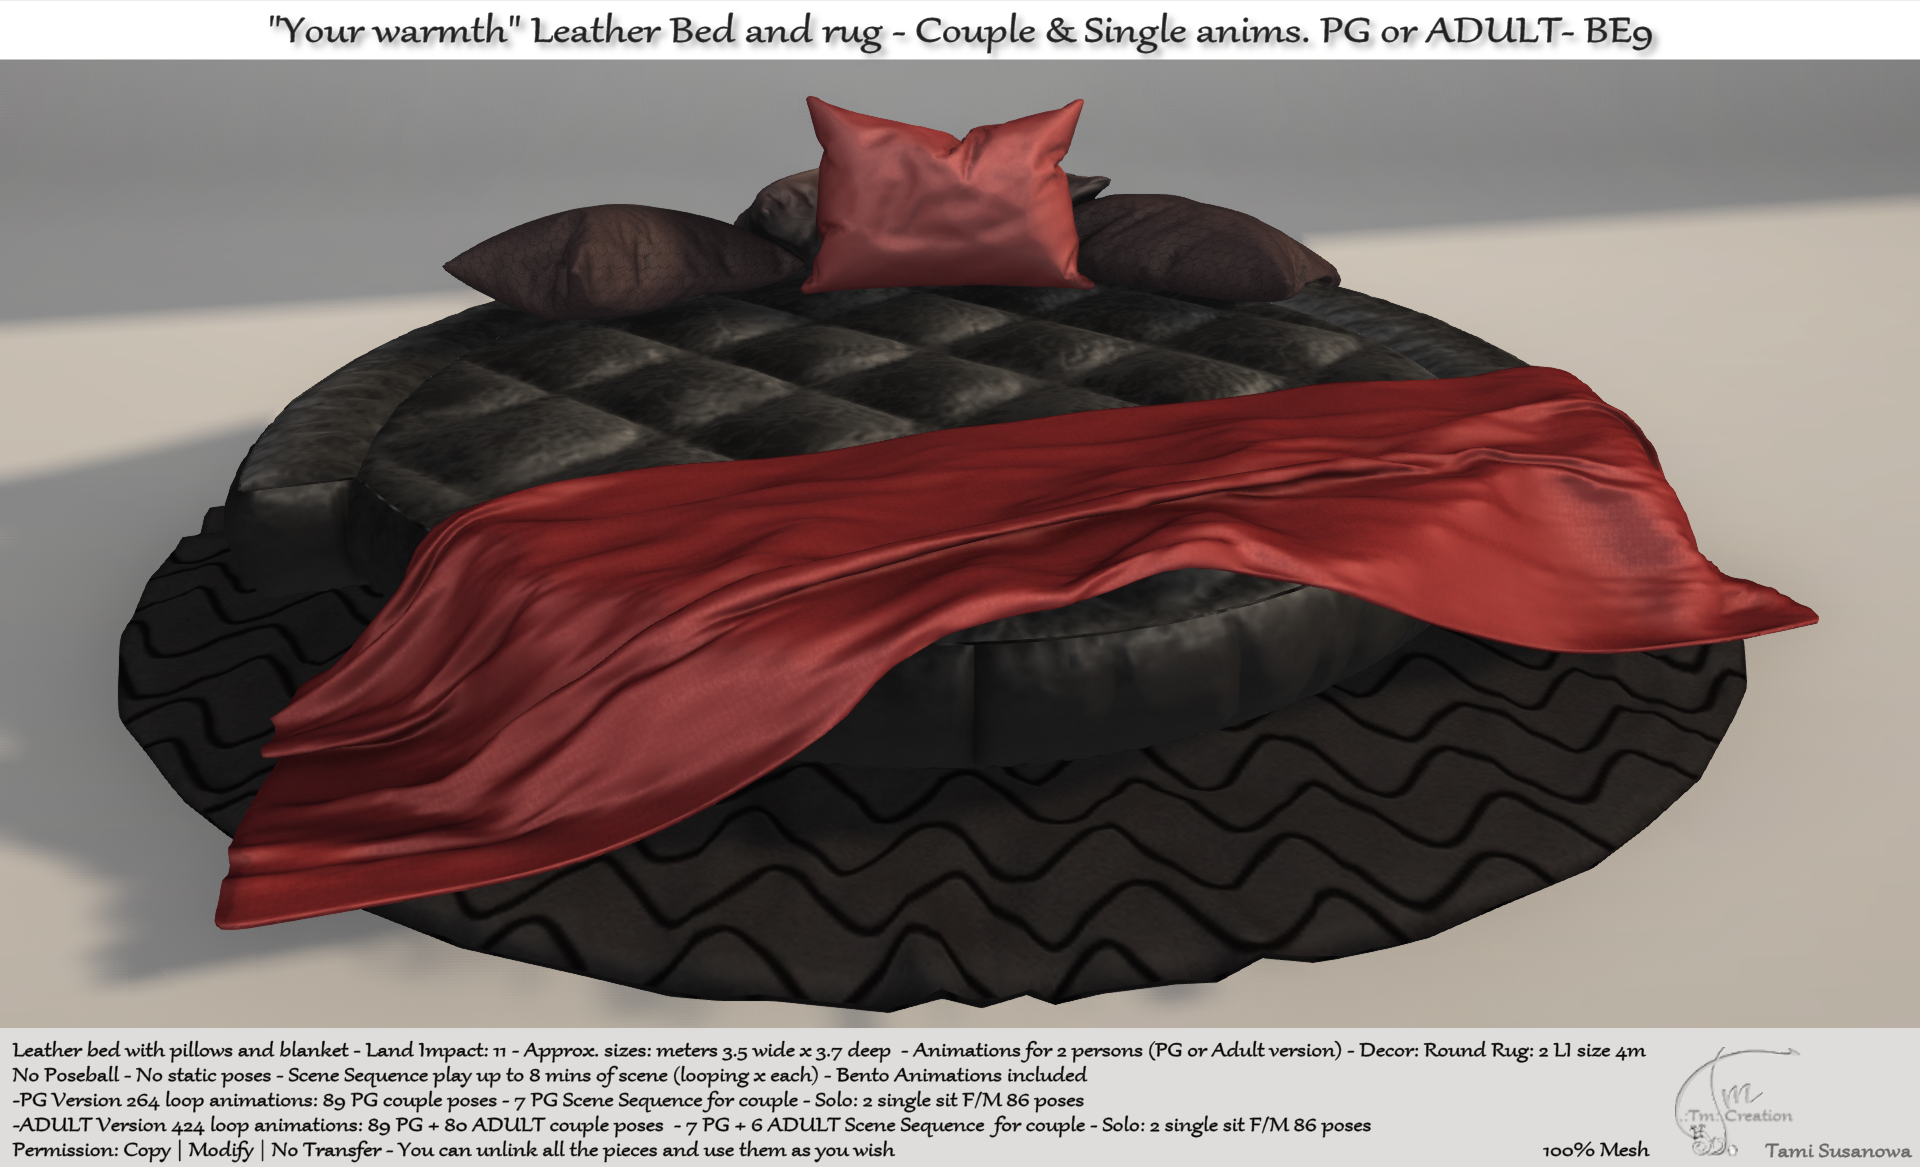 Tm Creation “Your Warmth” Leather Bed and Rug